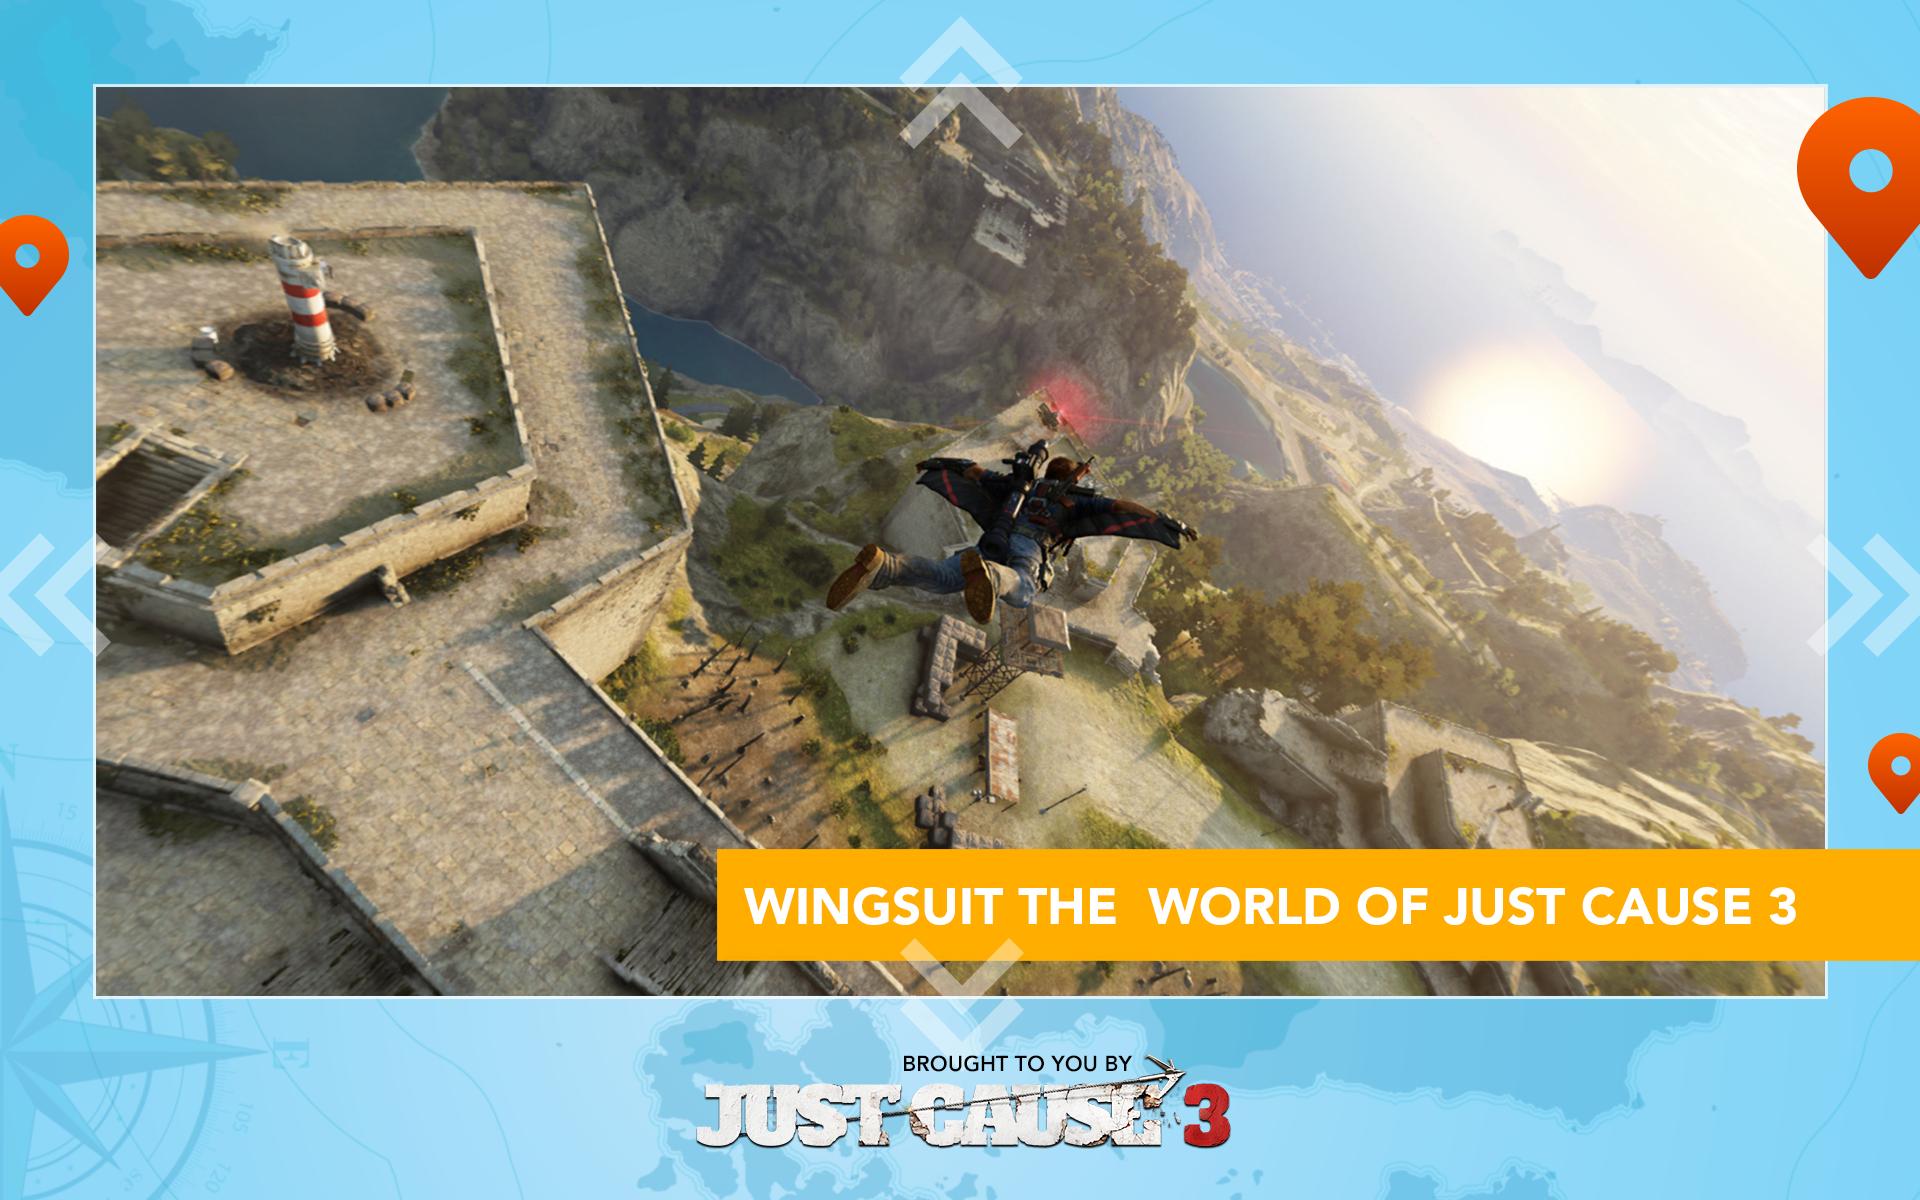 Just Cause 3 Wingsuit Tour For Android Apk Download Images, Photos, Reviews